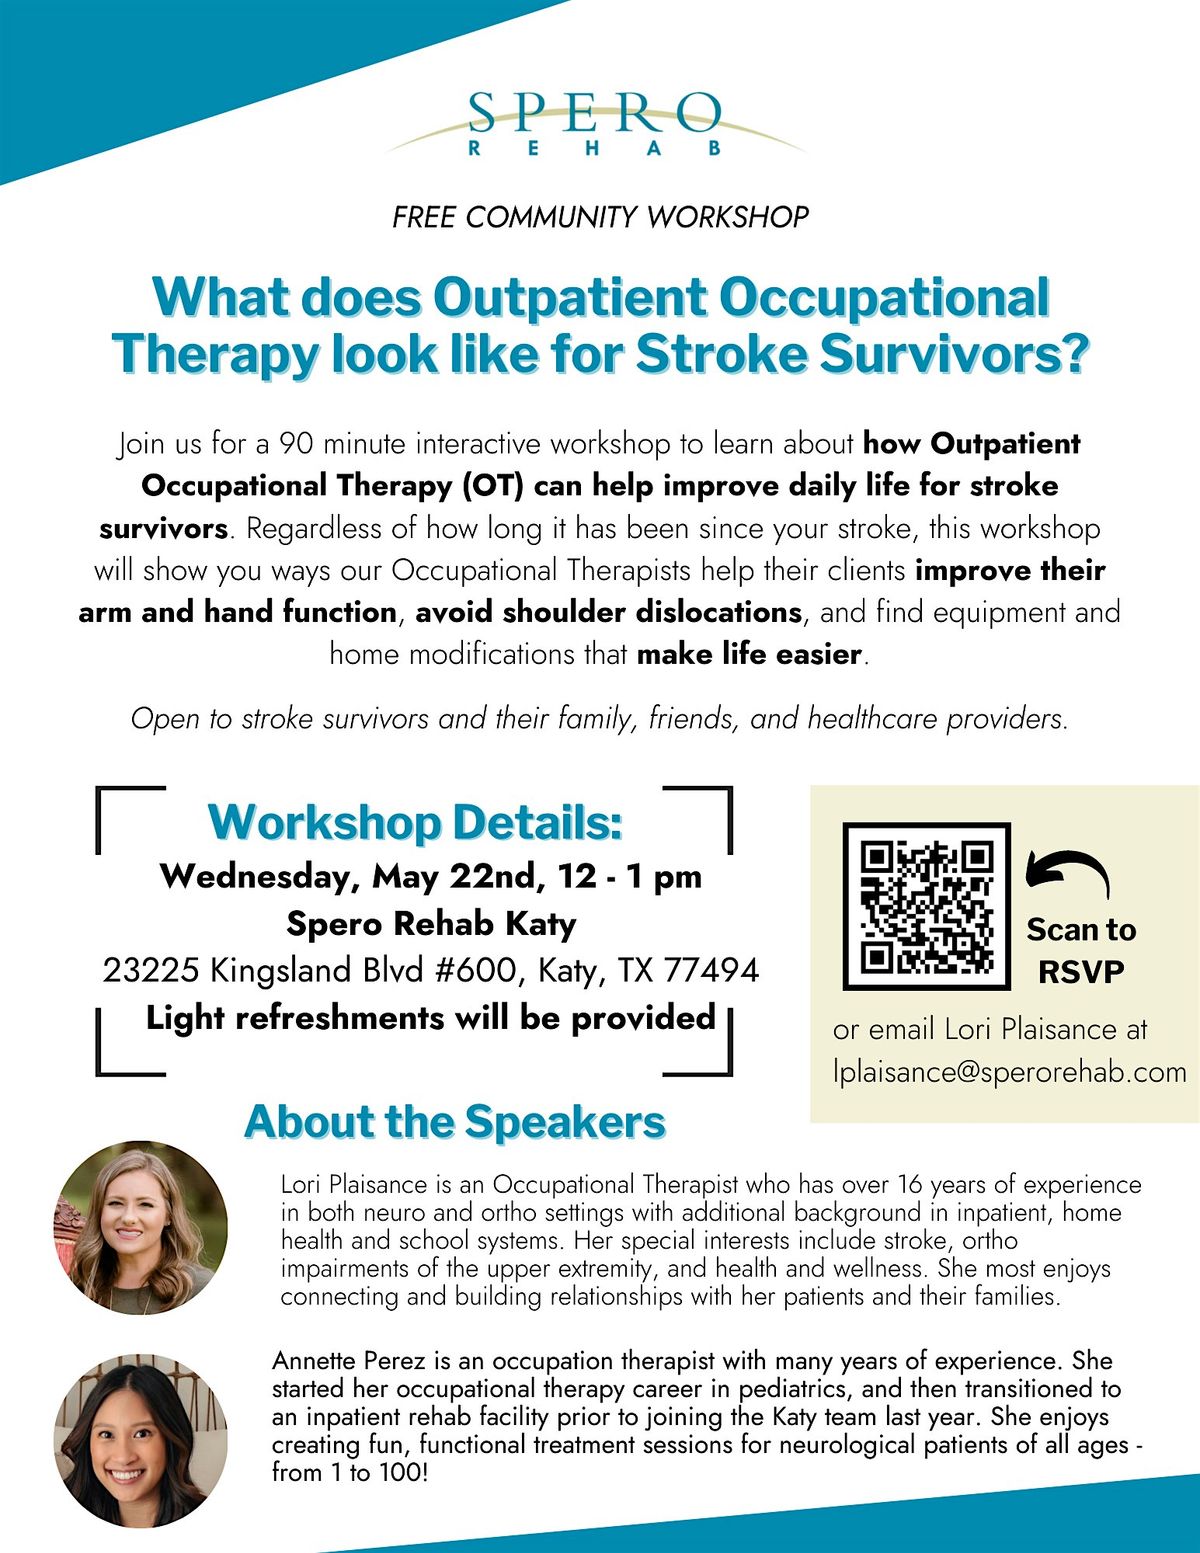 What Does Outpatient Occupational Therapy Look Like For Stroke Survivors?